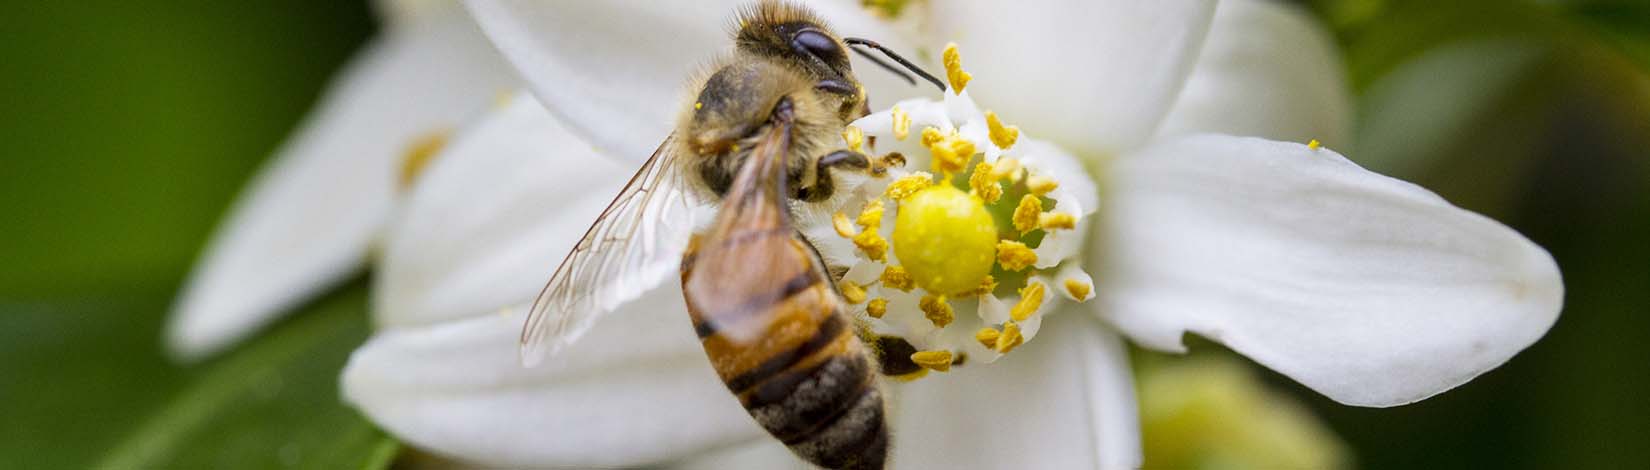 Bees pollinating nectar plants